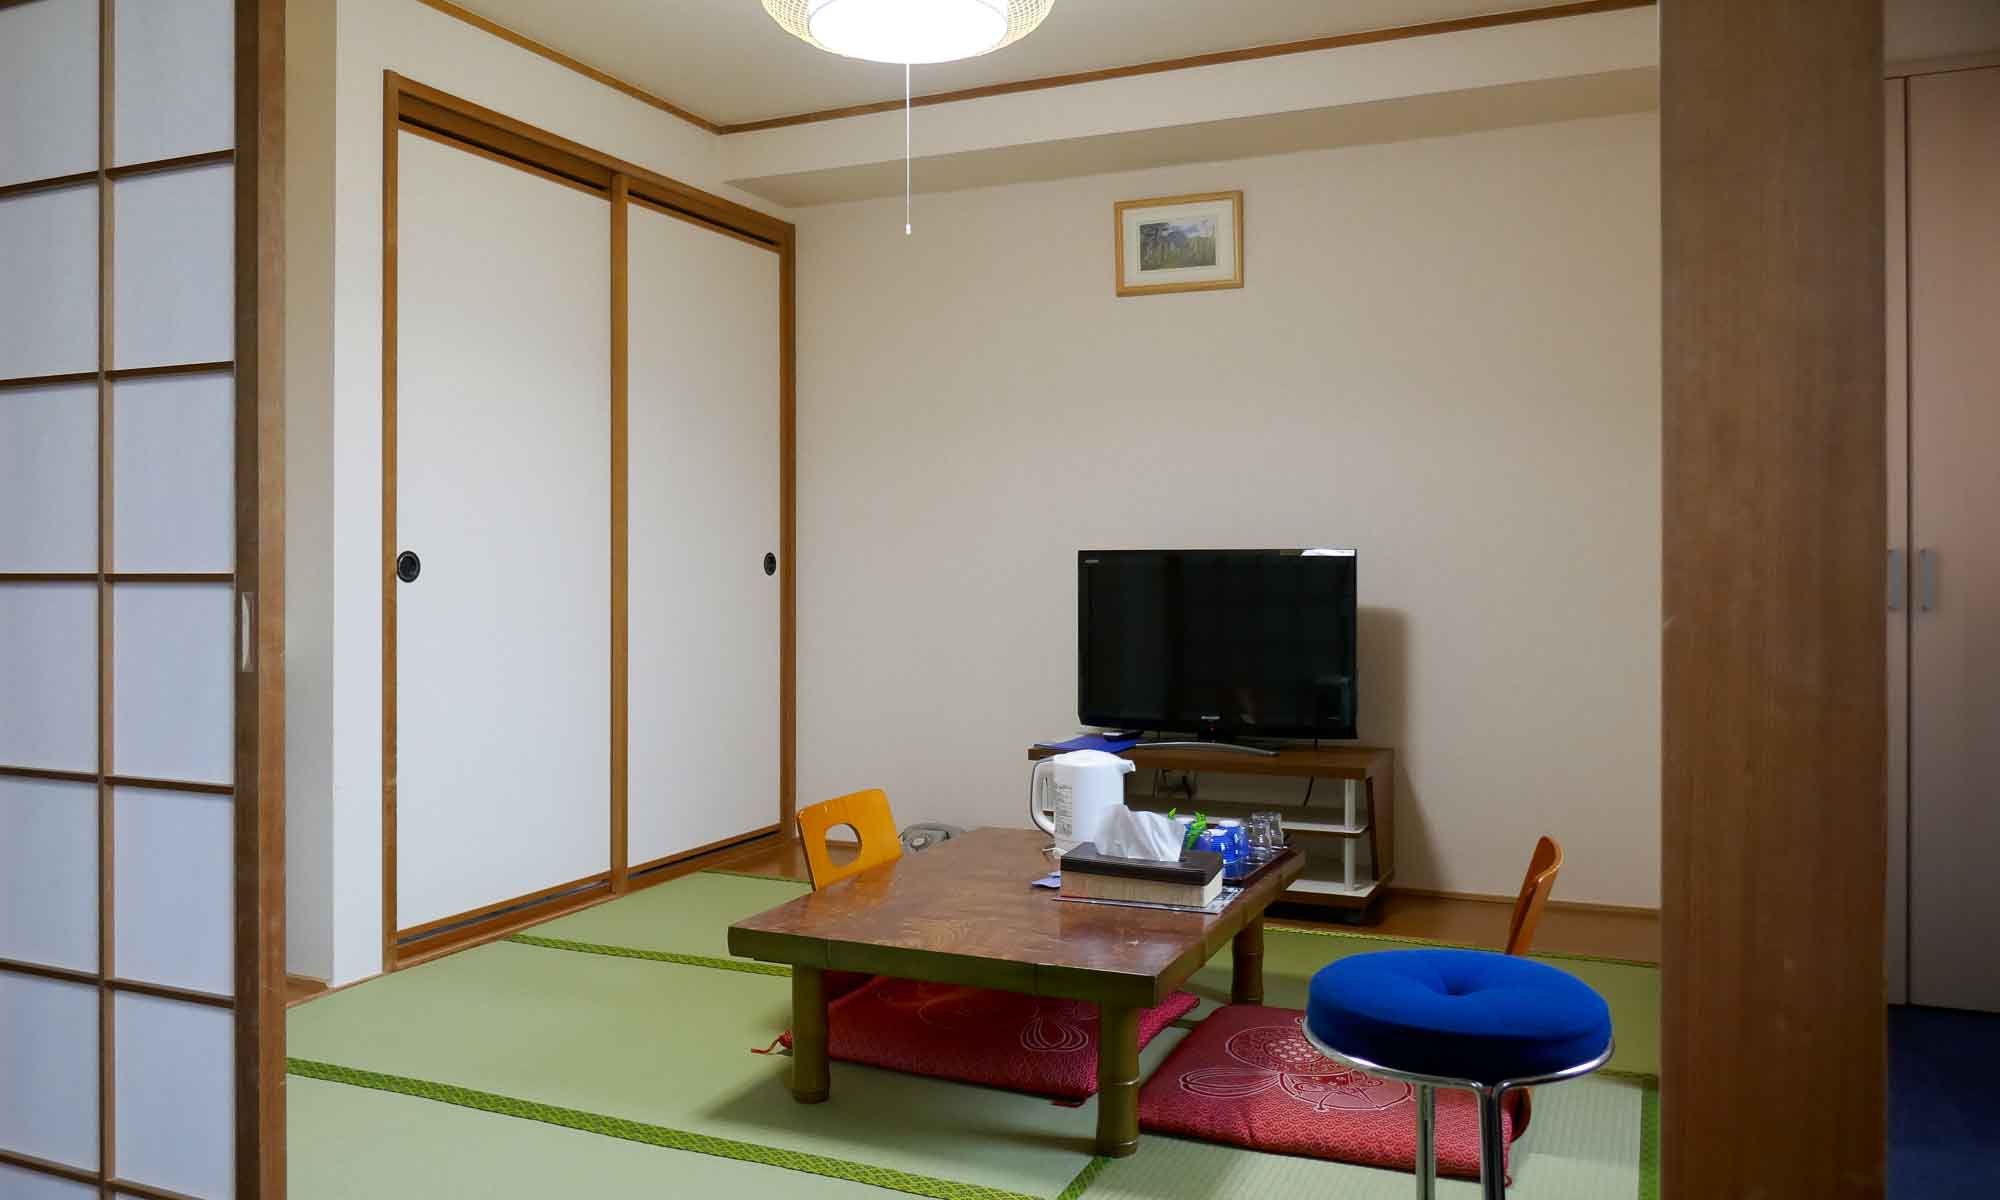 The tatami area in our room